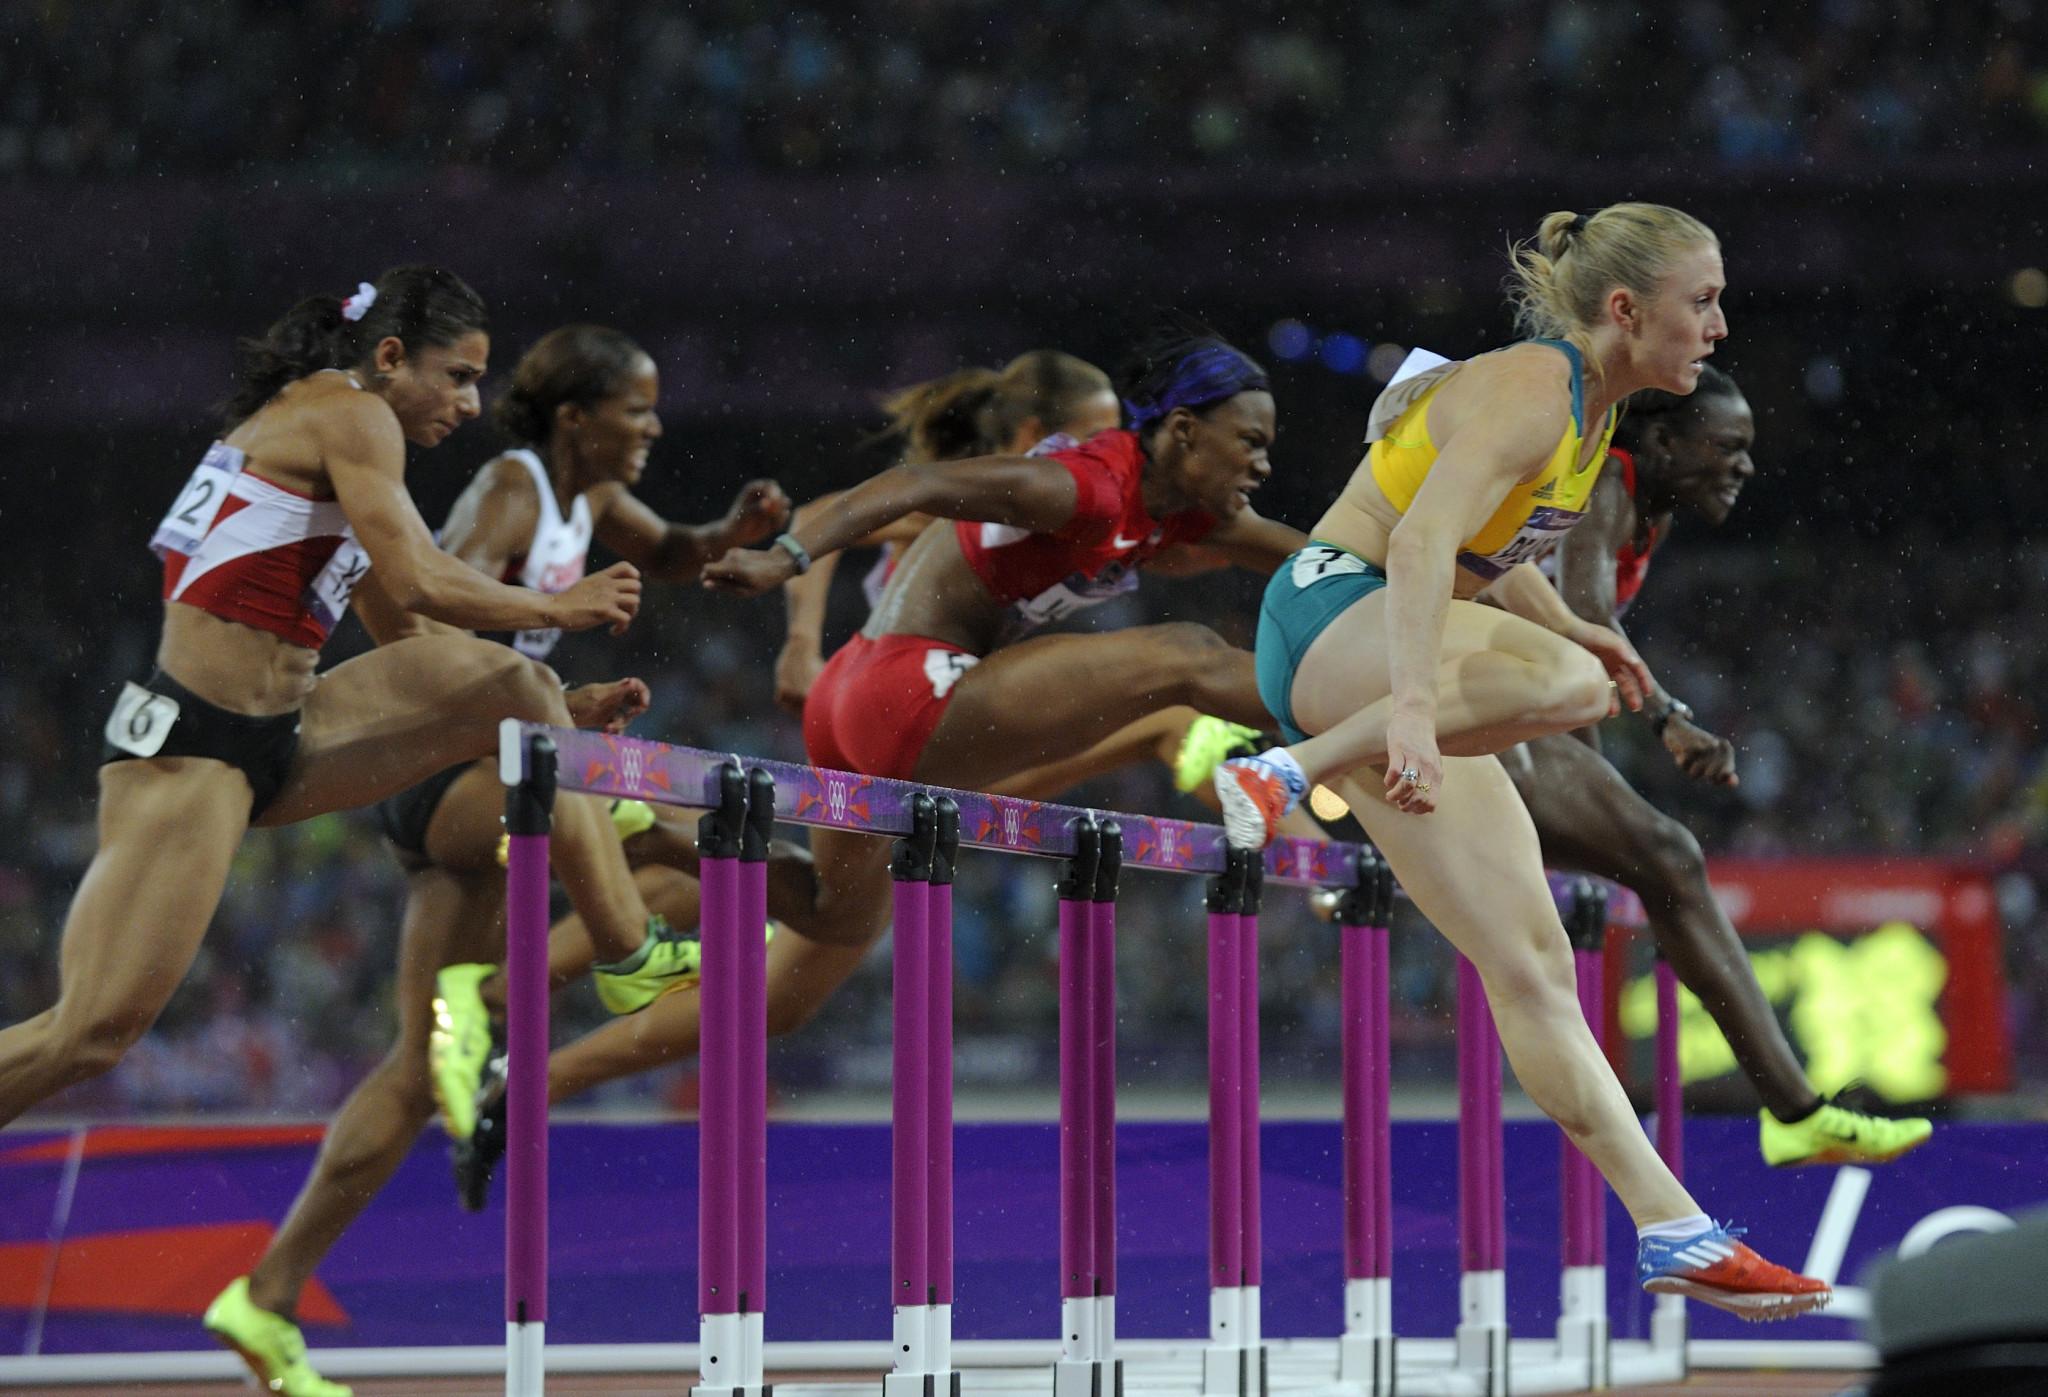 Sally Pearson earned Olympic gold in the 100m hurdles at London 2012 ©Getty Images